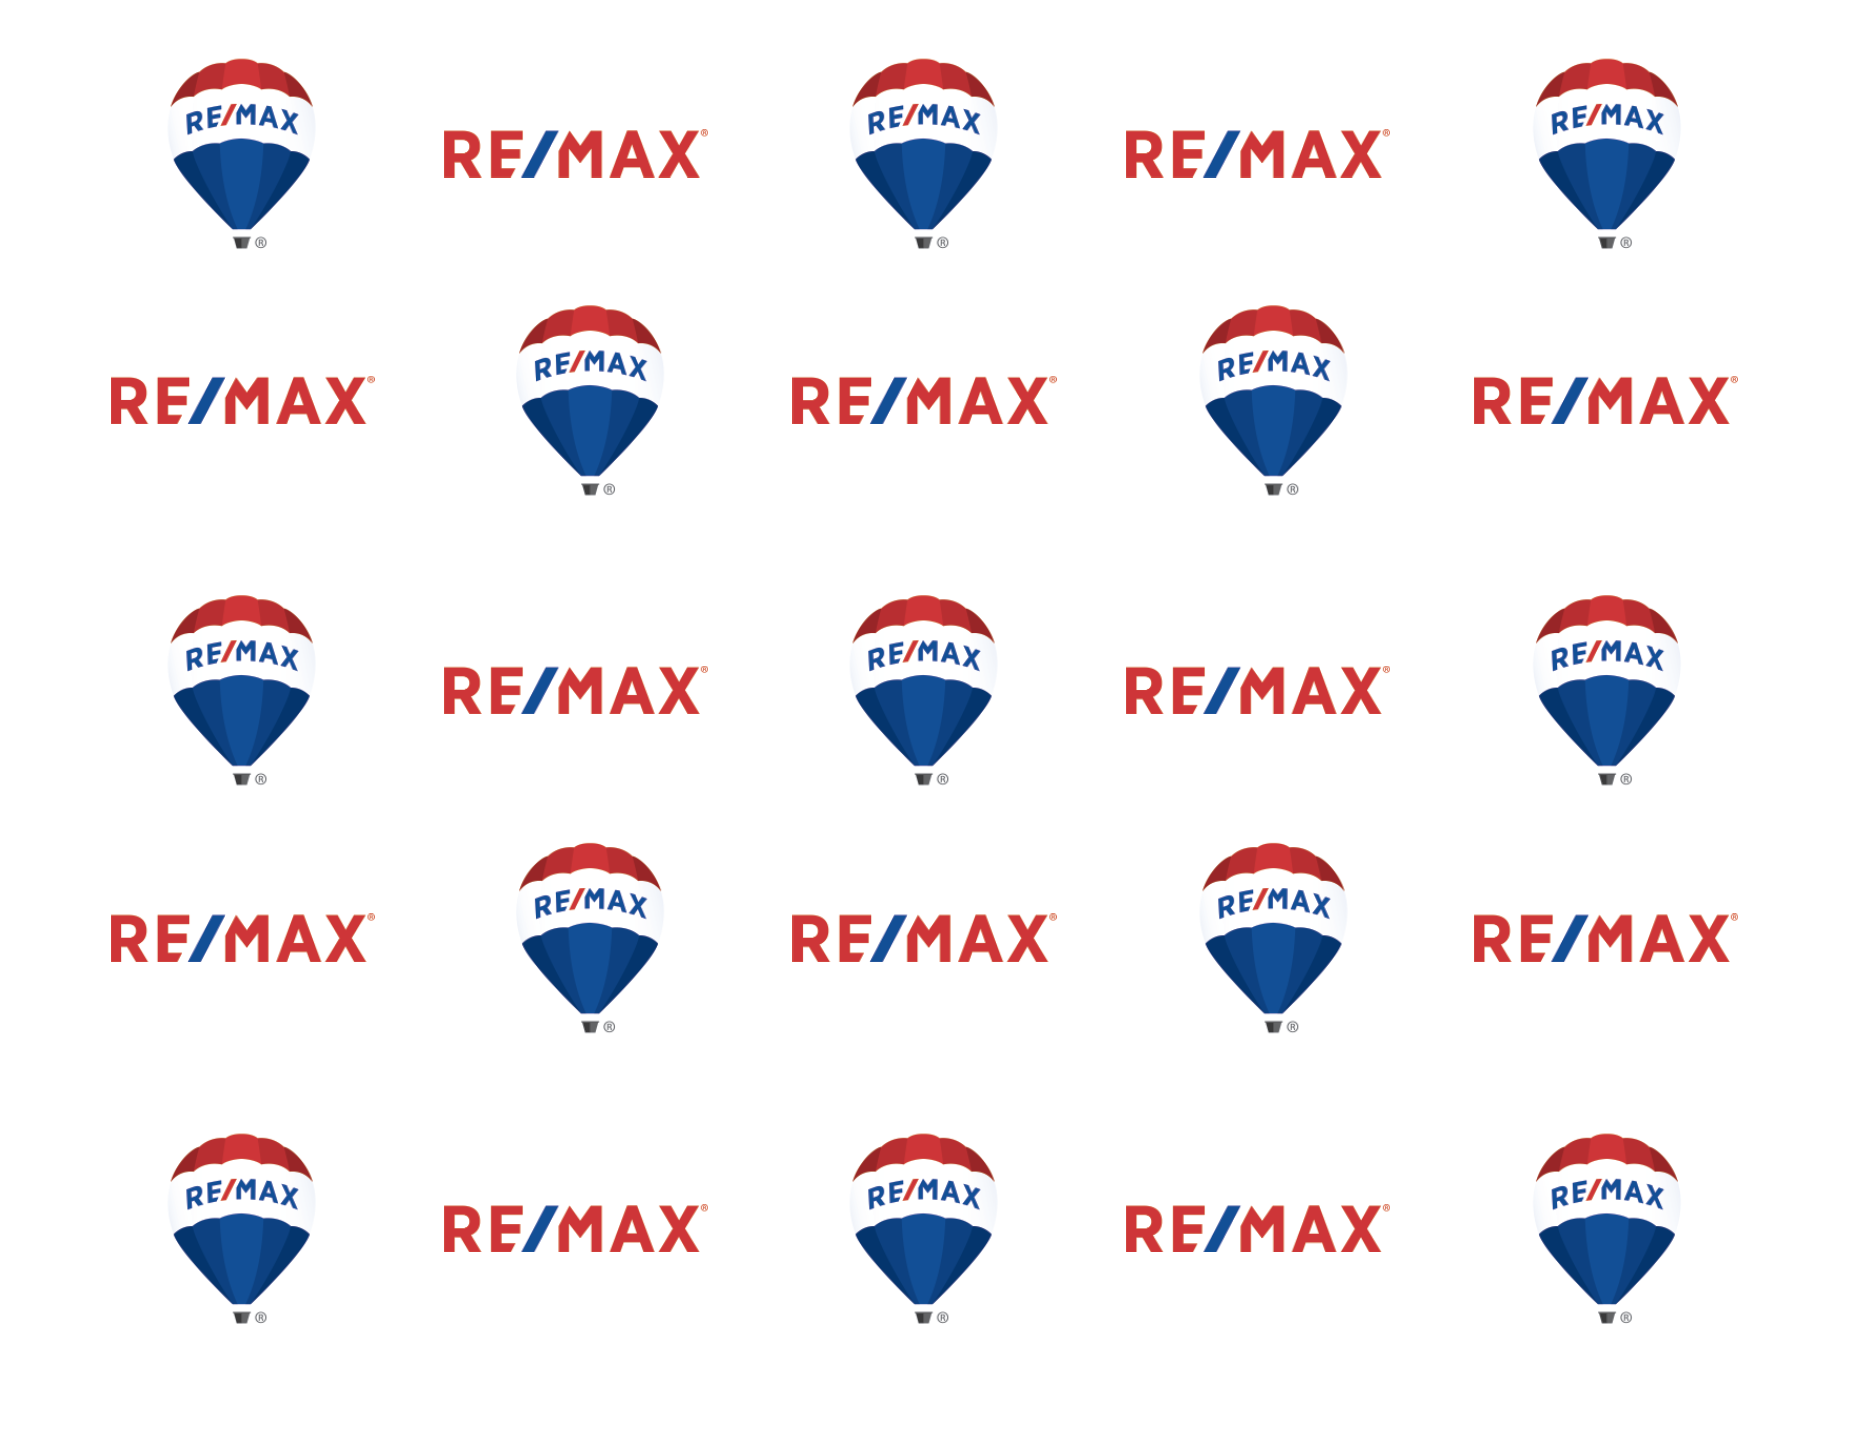 REMAX_Backdrop_MUP.png